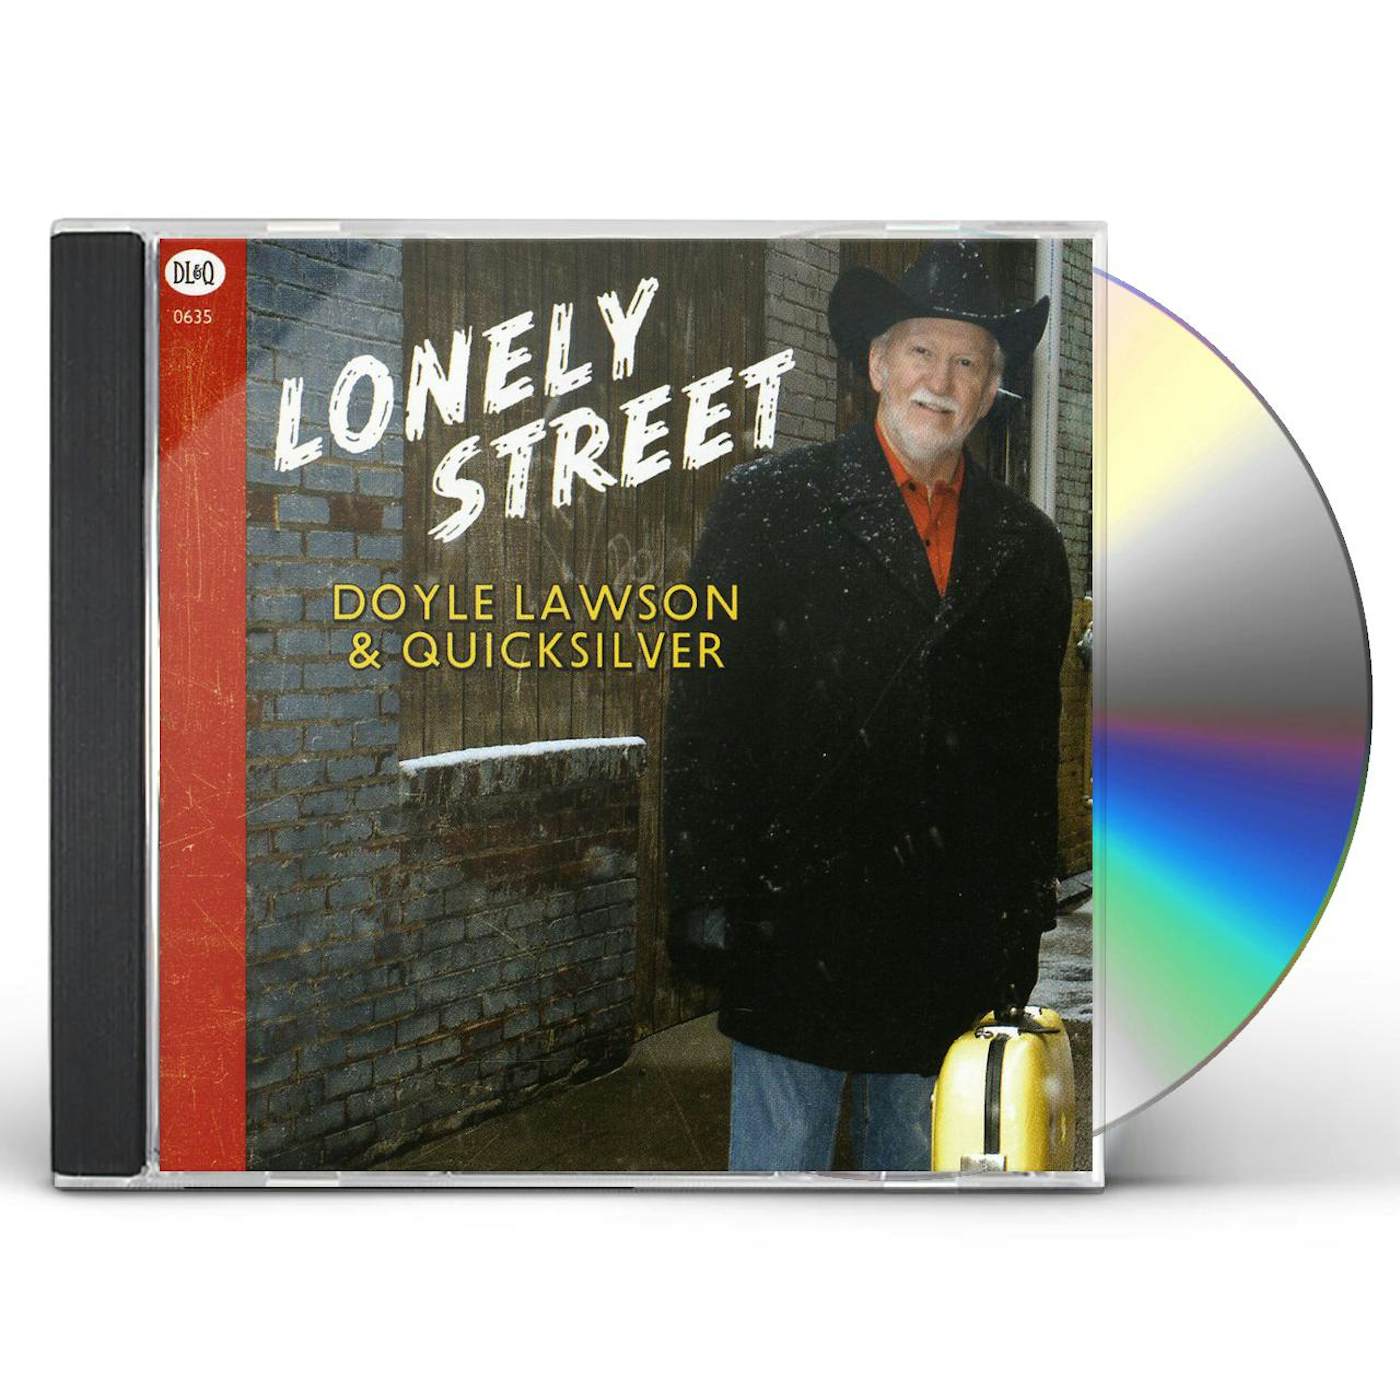 Doyle Lawson & Quicksilver LONELY STREET CD